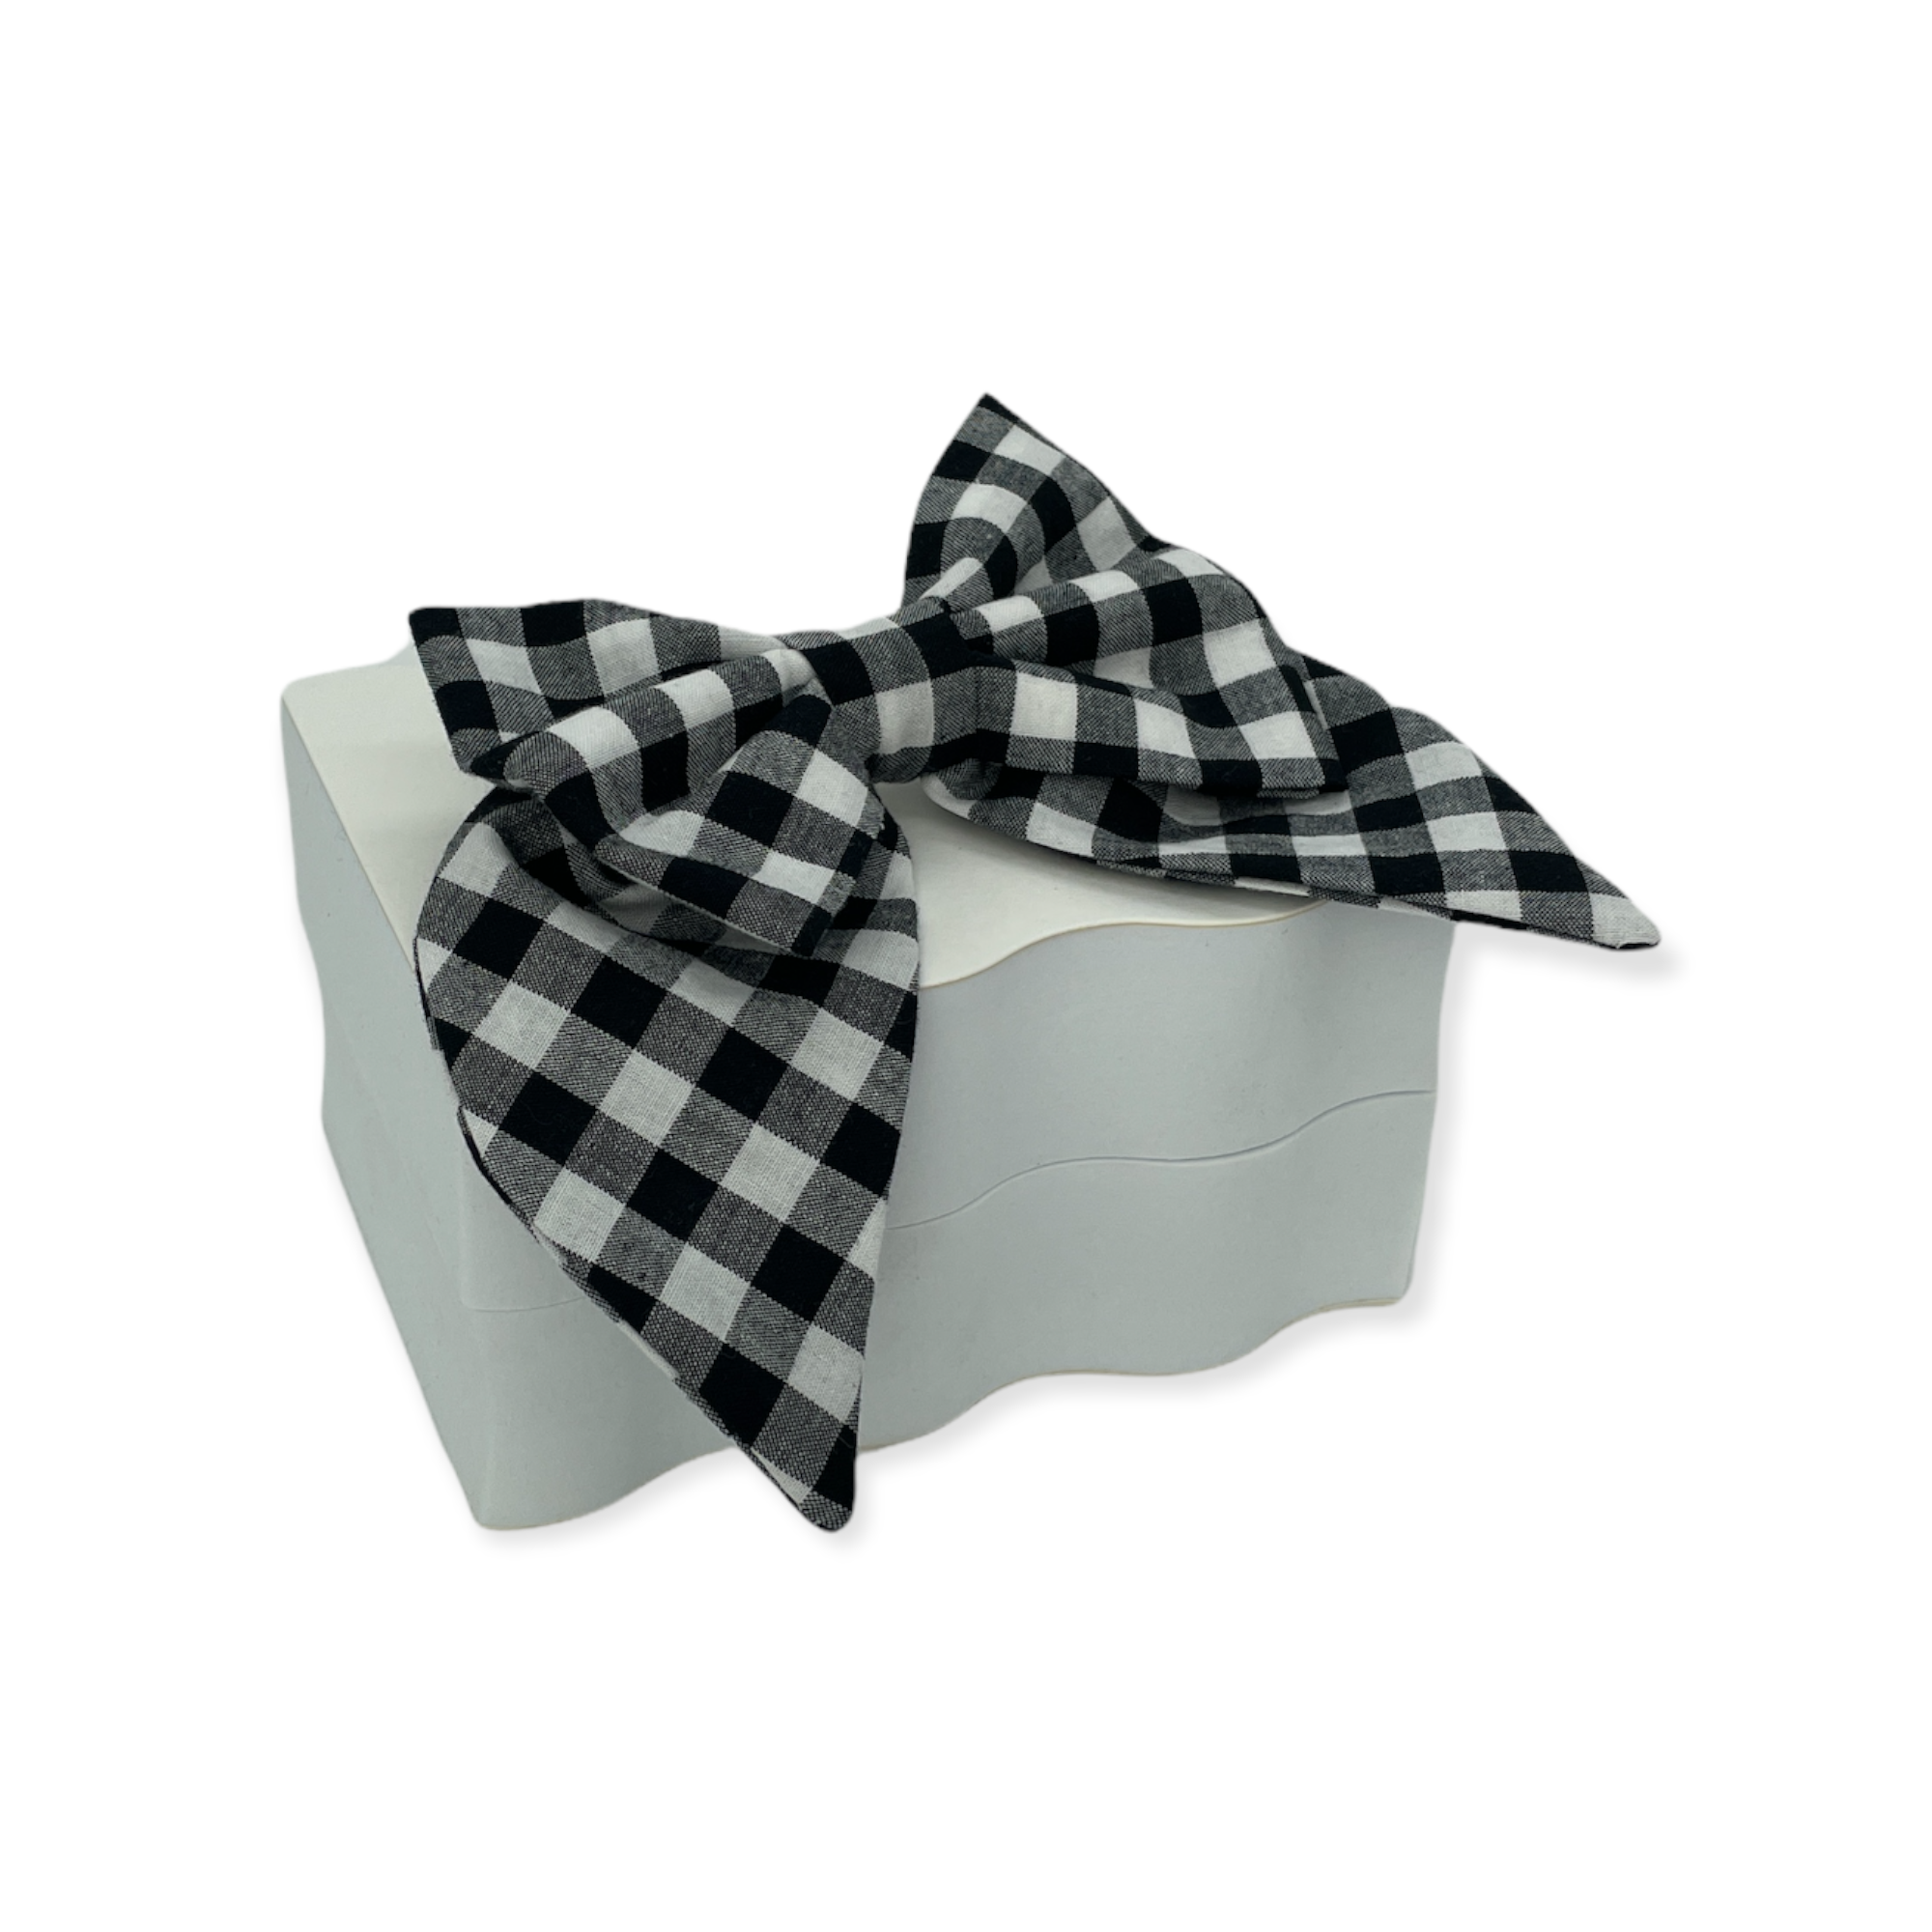 Derby Day Sailor Bow